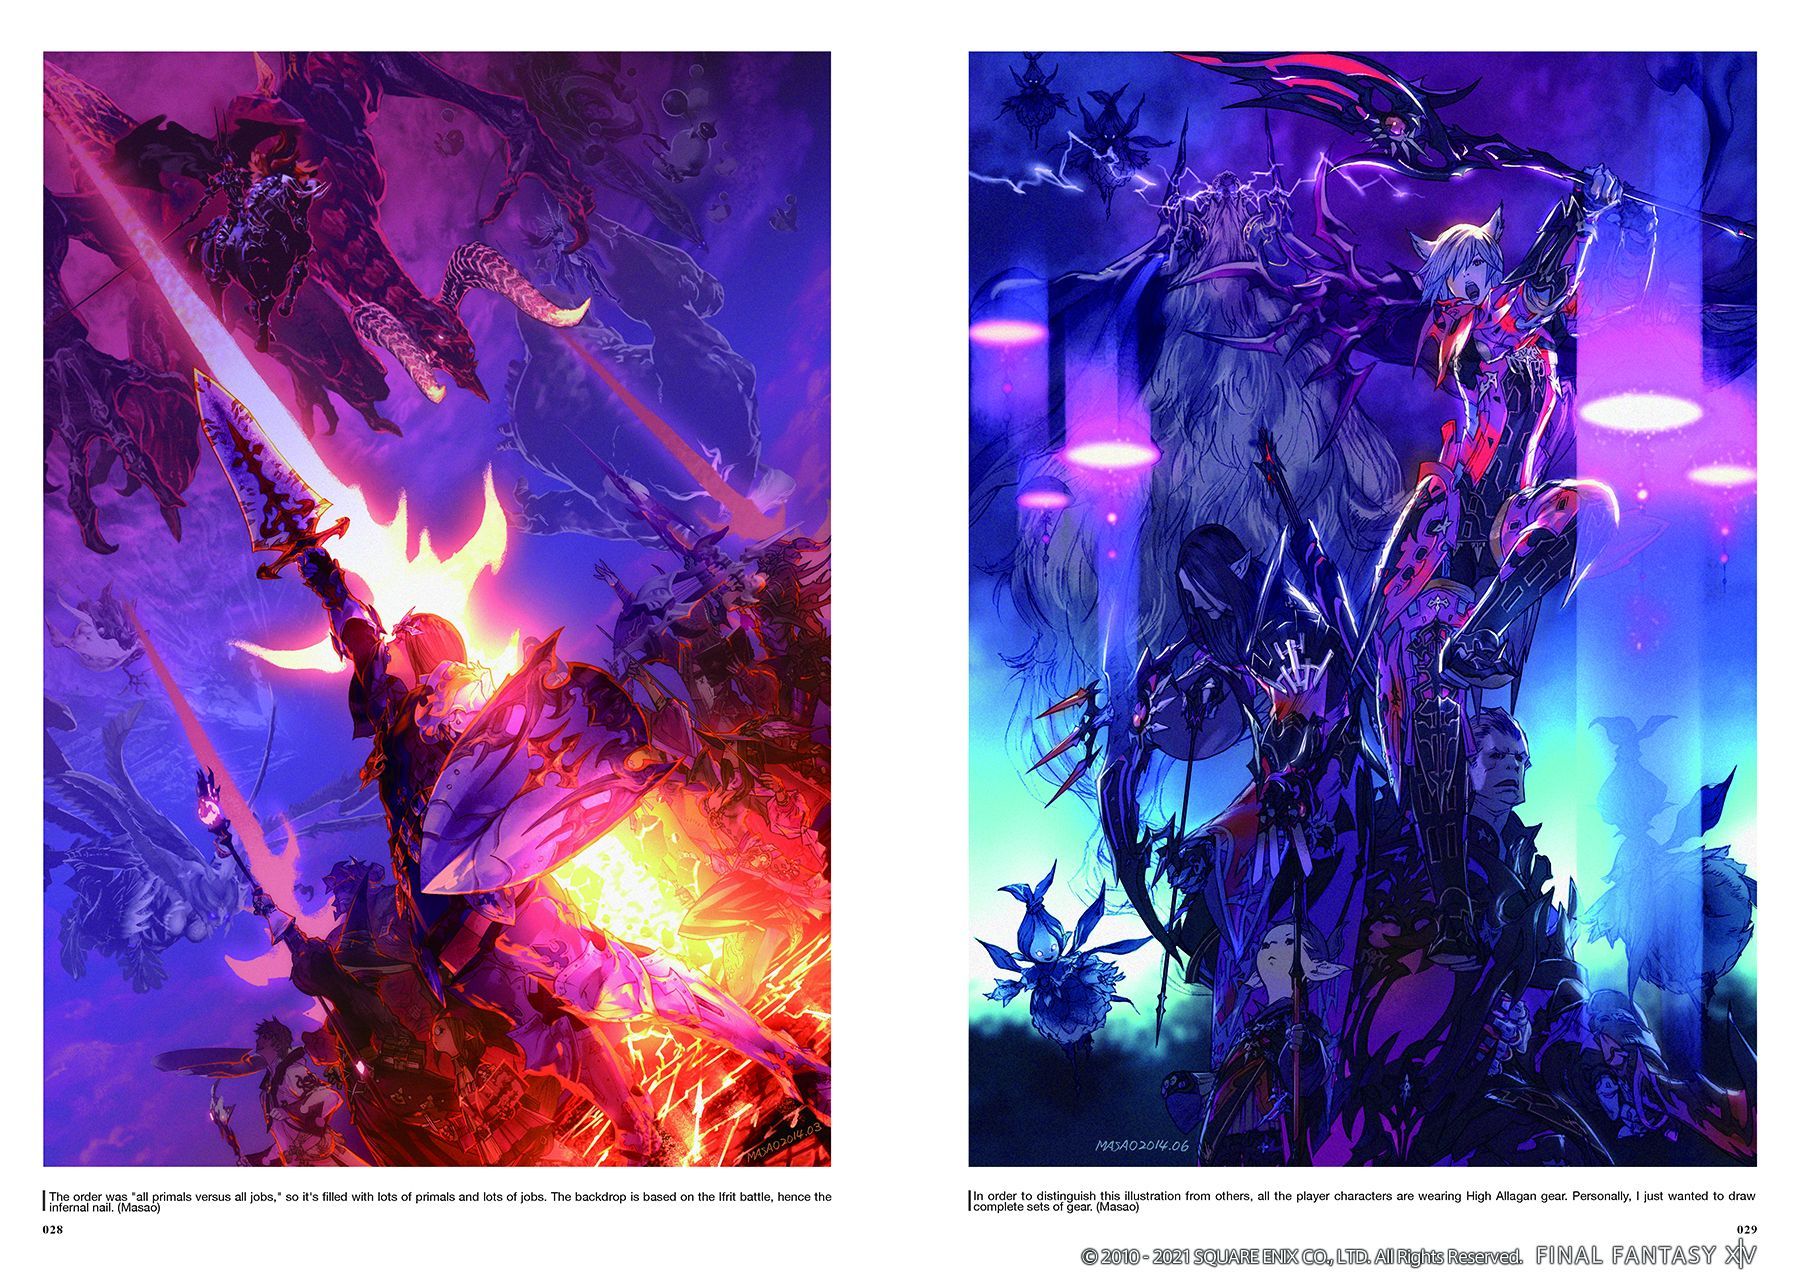 NEW FINAL FANTASY XIV A Realm Reborn The Art of Eorzea Another Dawn Art Book